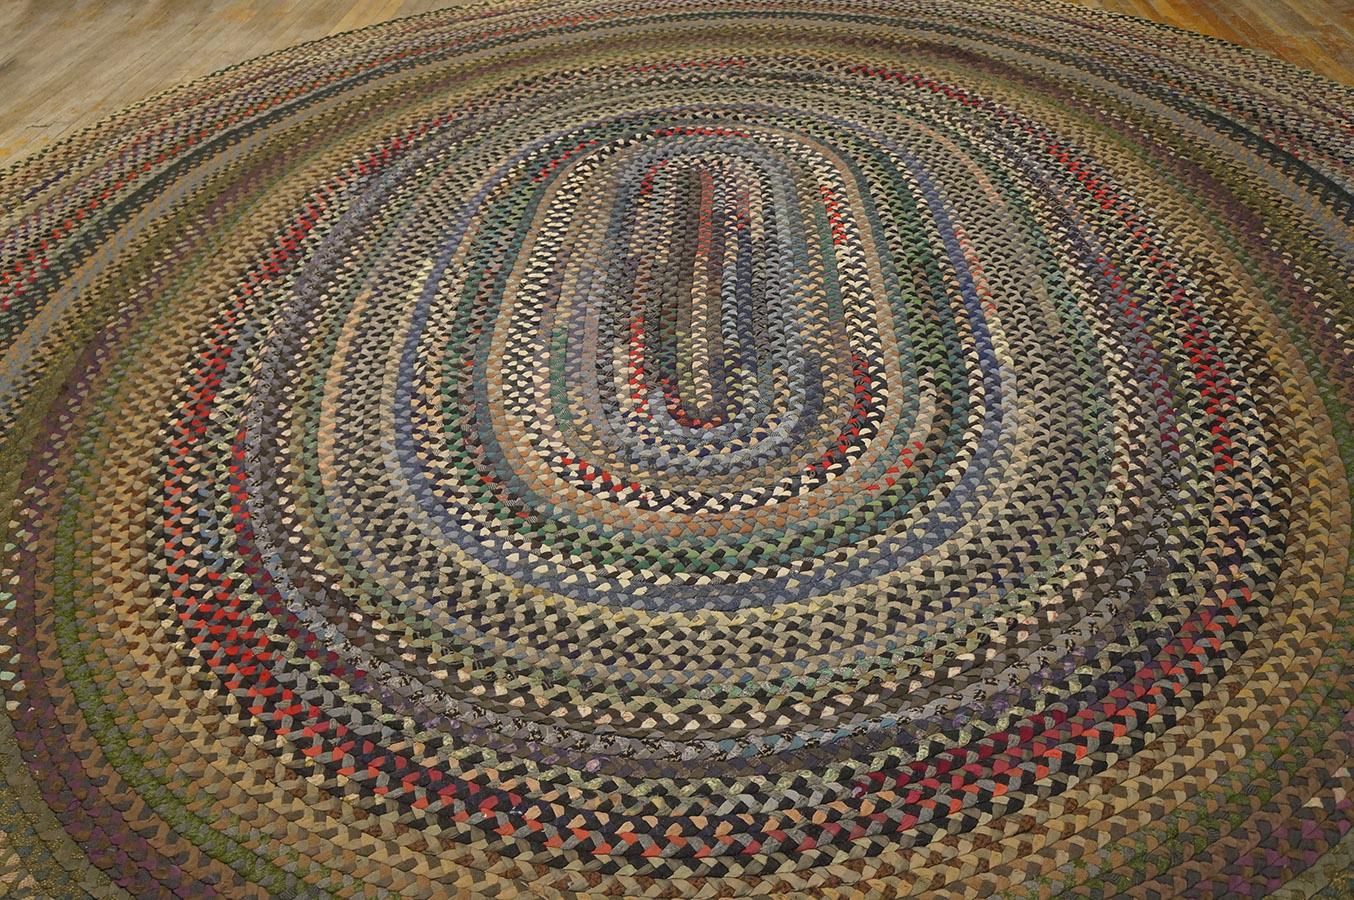 Antique American Oval Braided Rug 
12'6